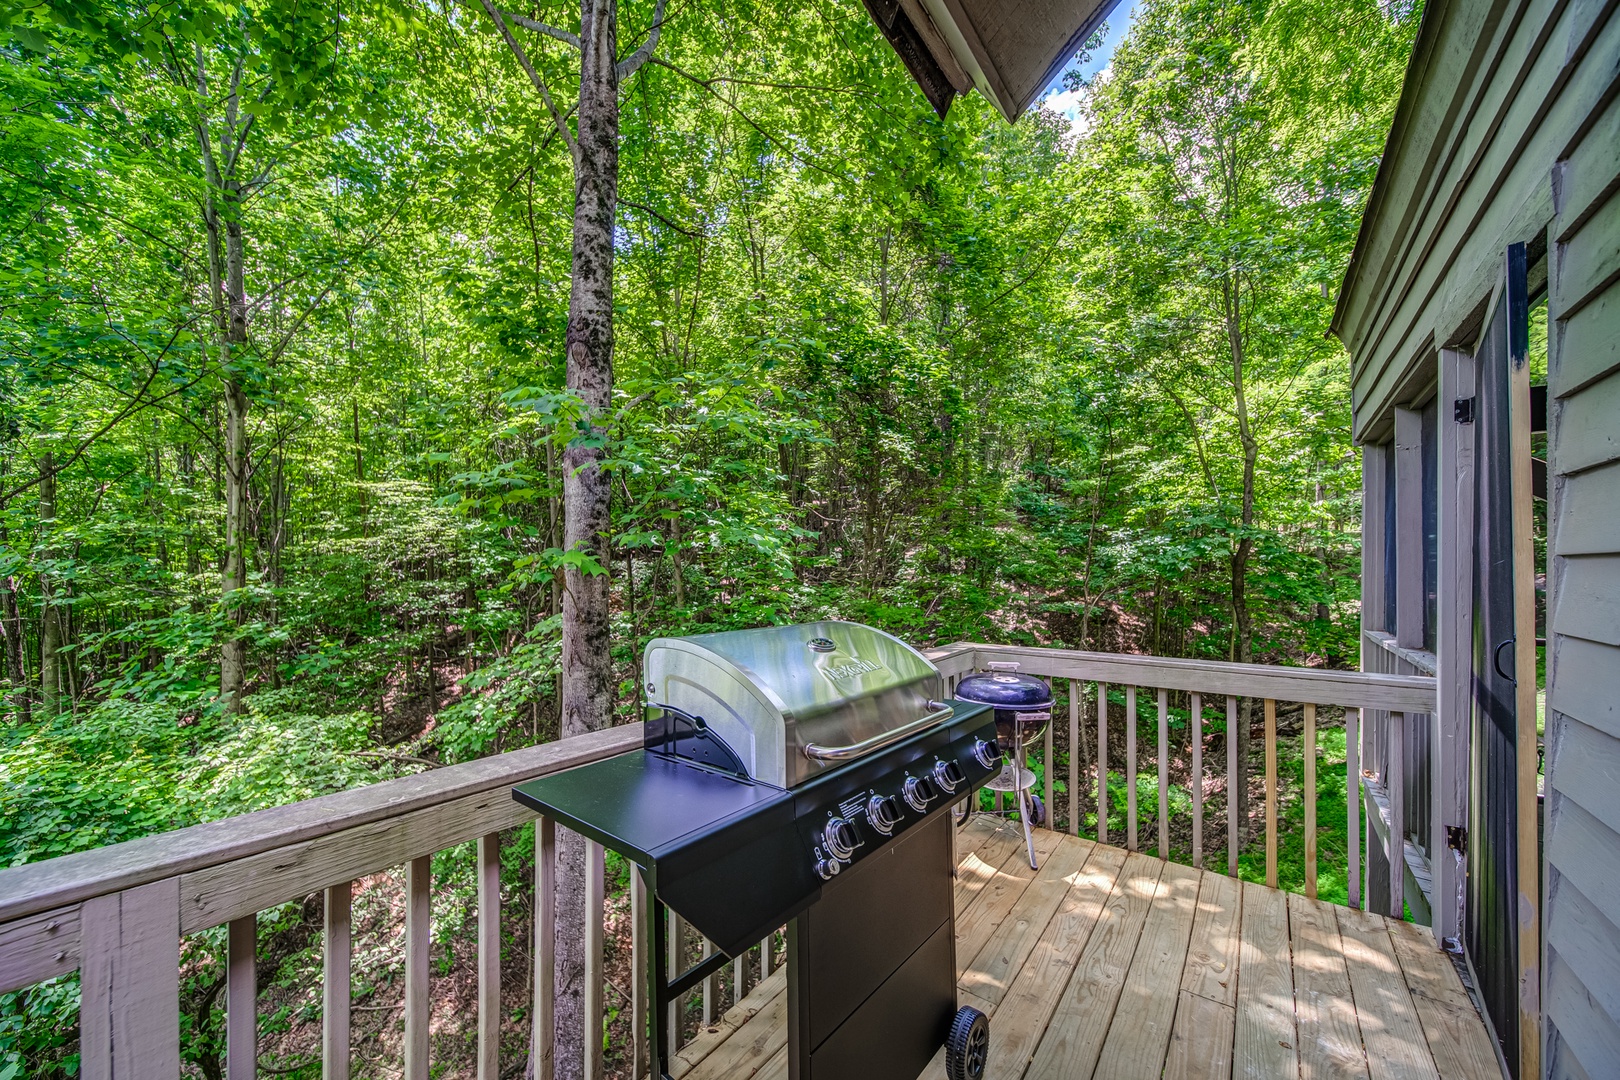 Propane & charcoal grill-masters will love cooking delicious meals on the deck